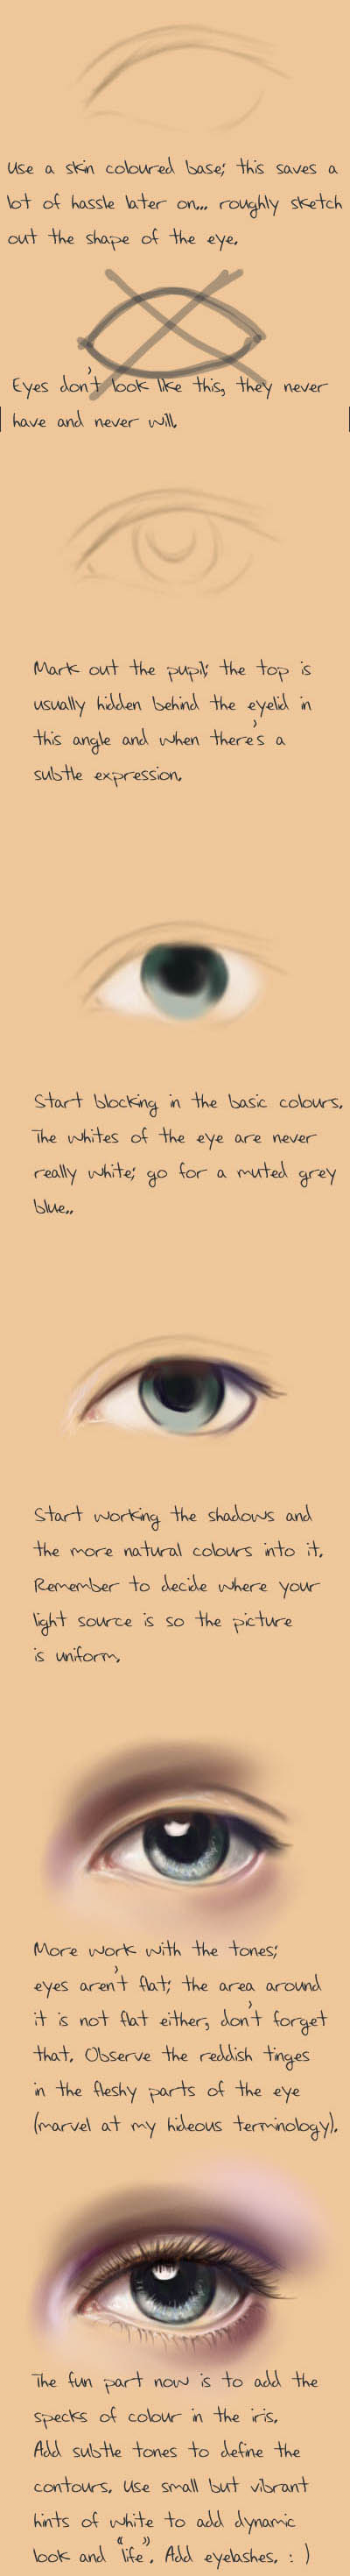 How to paint eyes by acidlullaby on DeviantArt